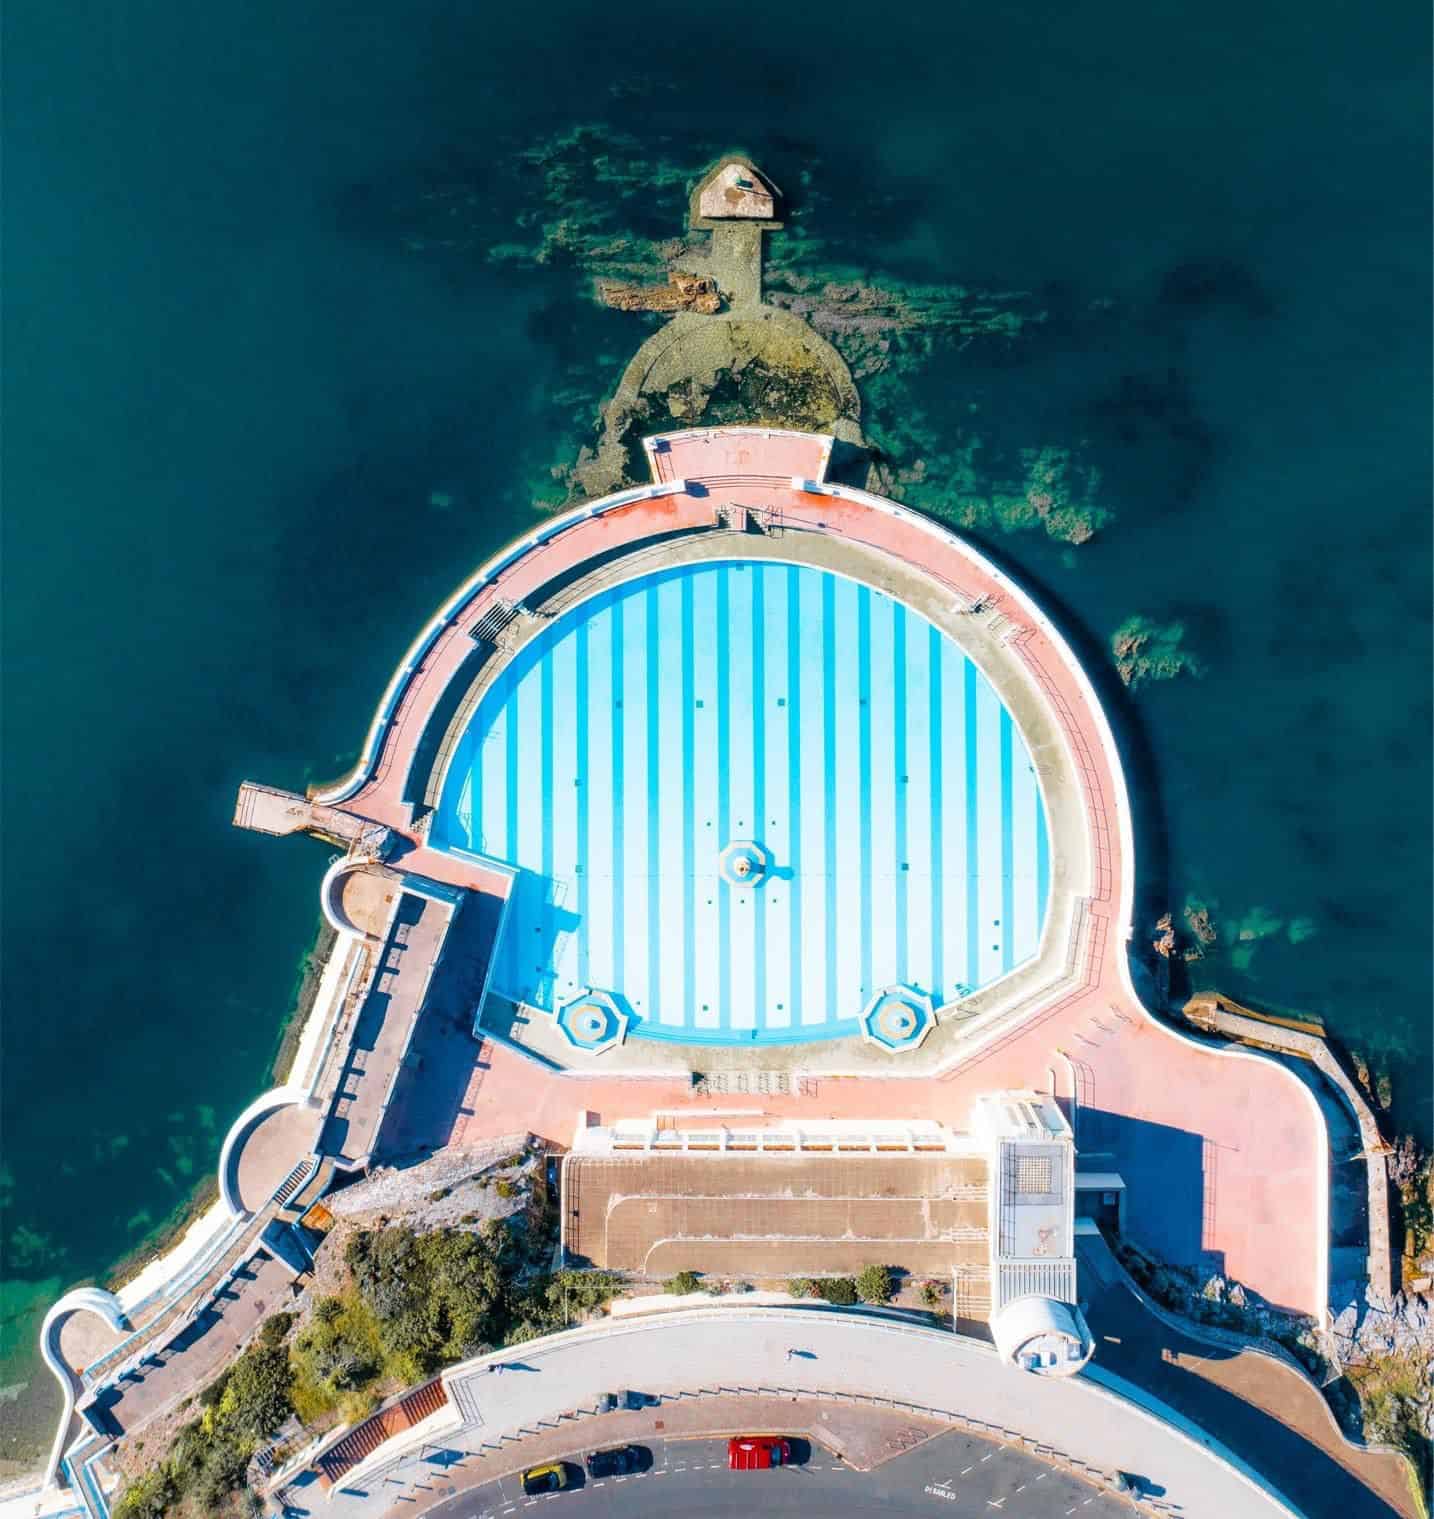 An aerial photo of a round outdoor lido swimming pool jutting out into the sea - the pool has light blue stripes on the bottom and light pink paths around it. The pool is in the art deco style and has three fountains. The sea around the pool is a dark blue colour.